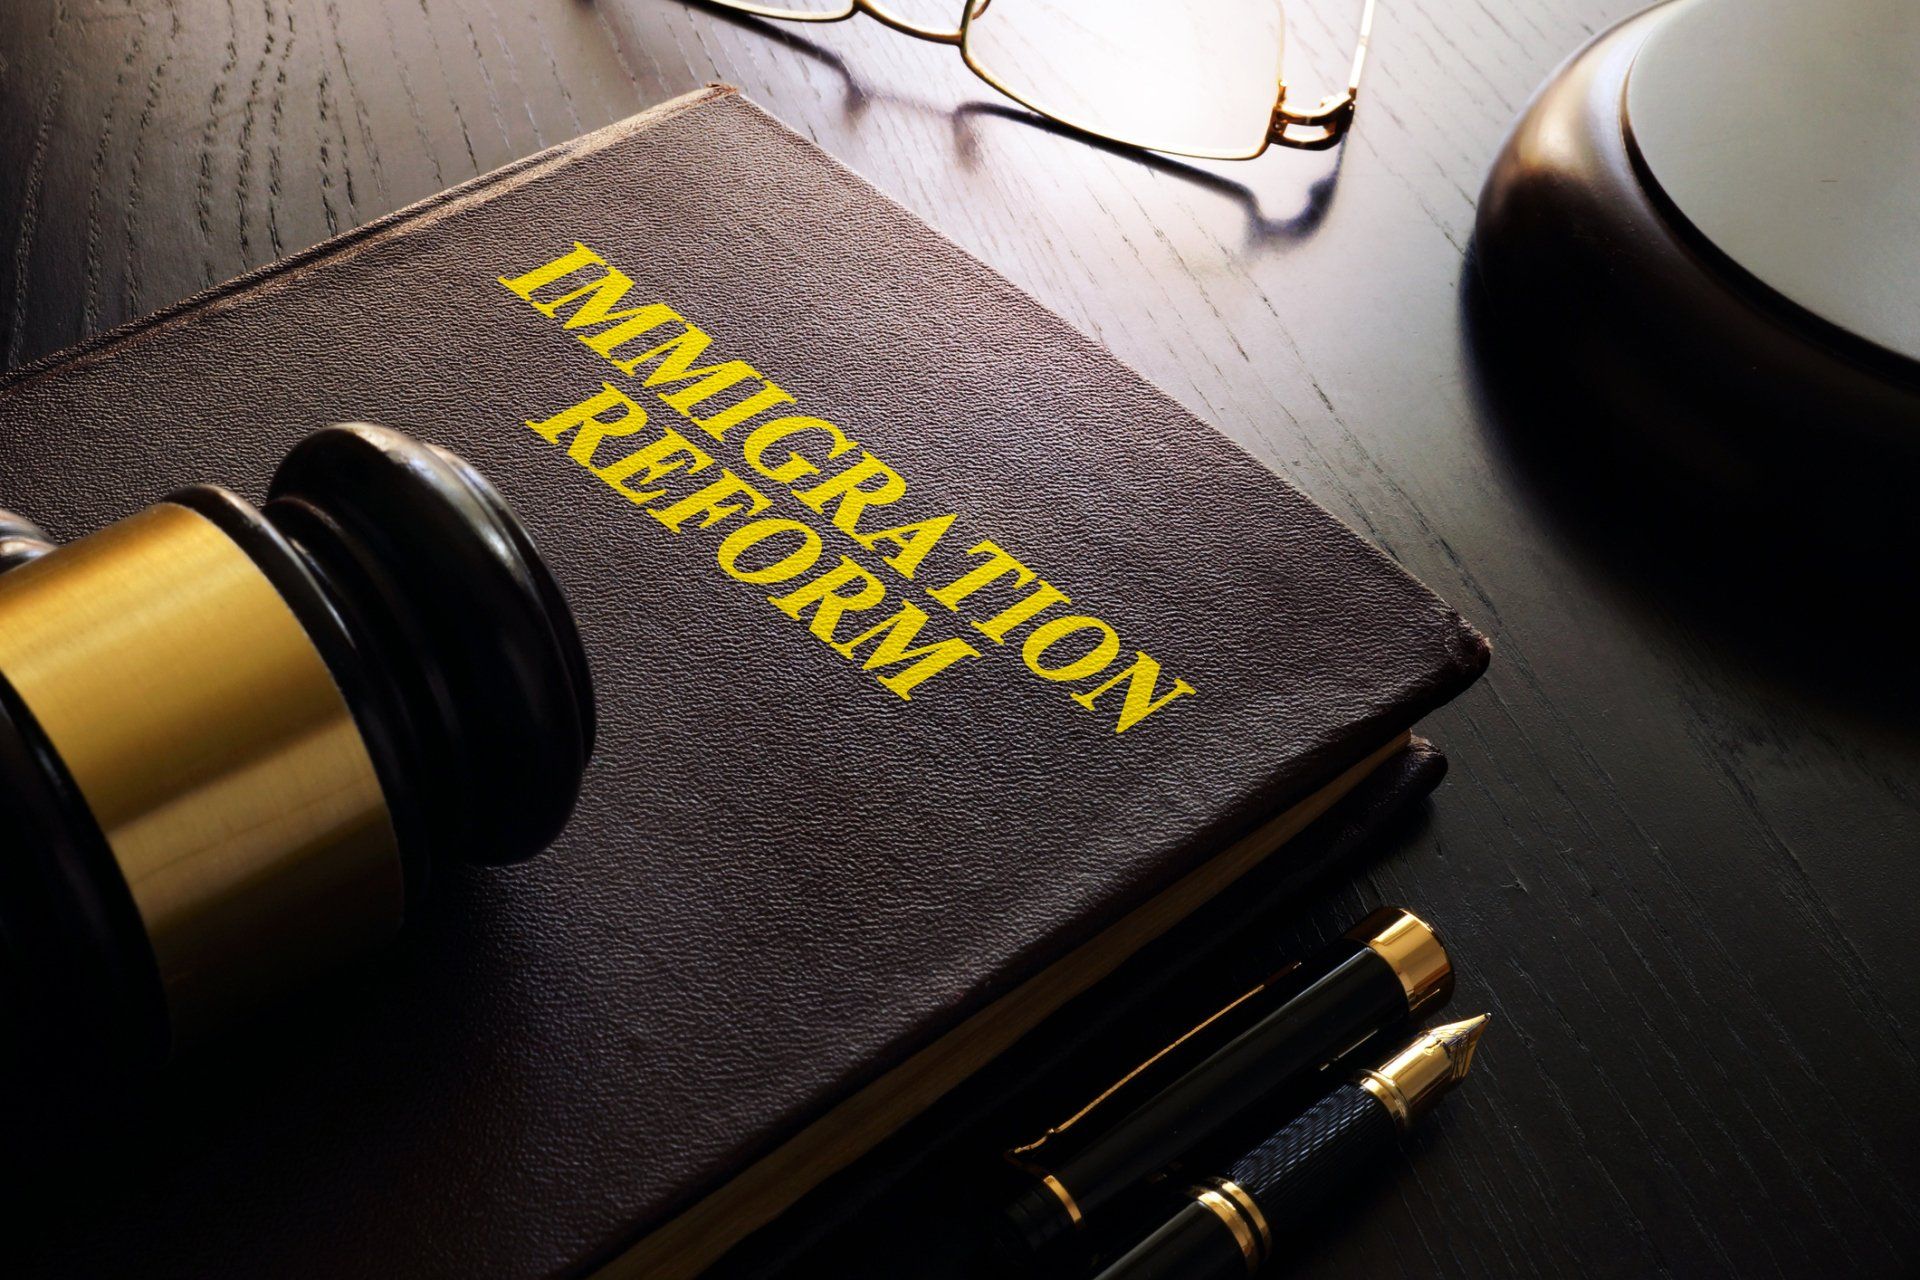 Book with title Immigration Reform — Bellaire, TX — Garza & Associates